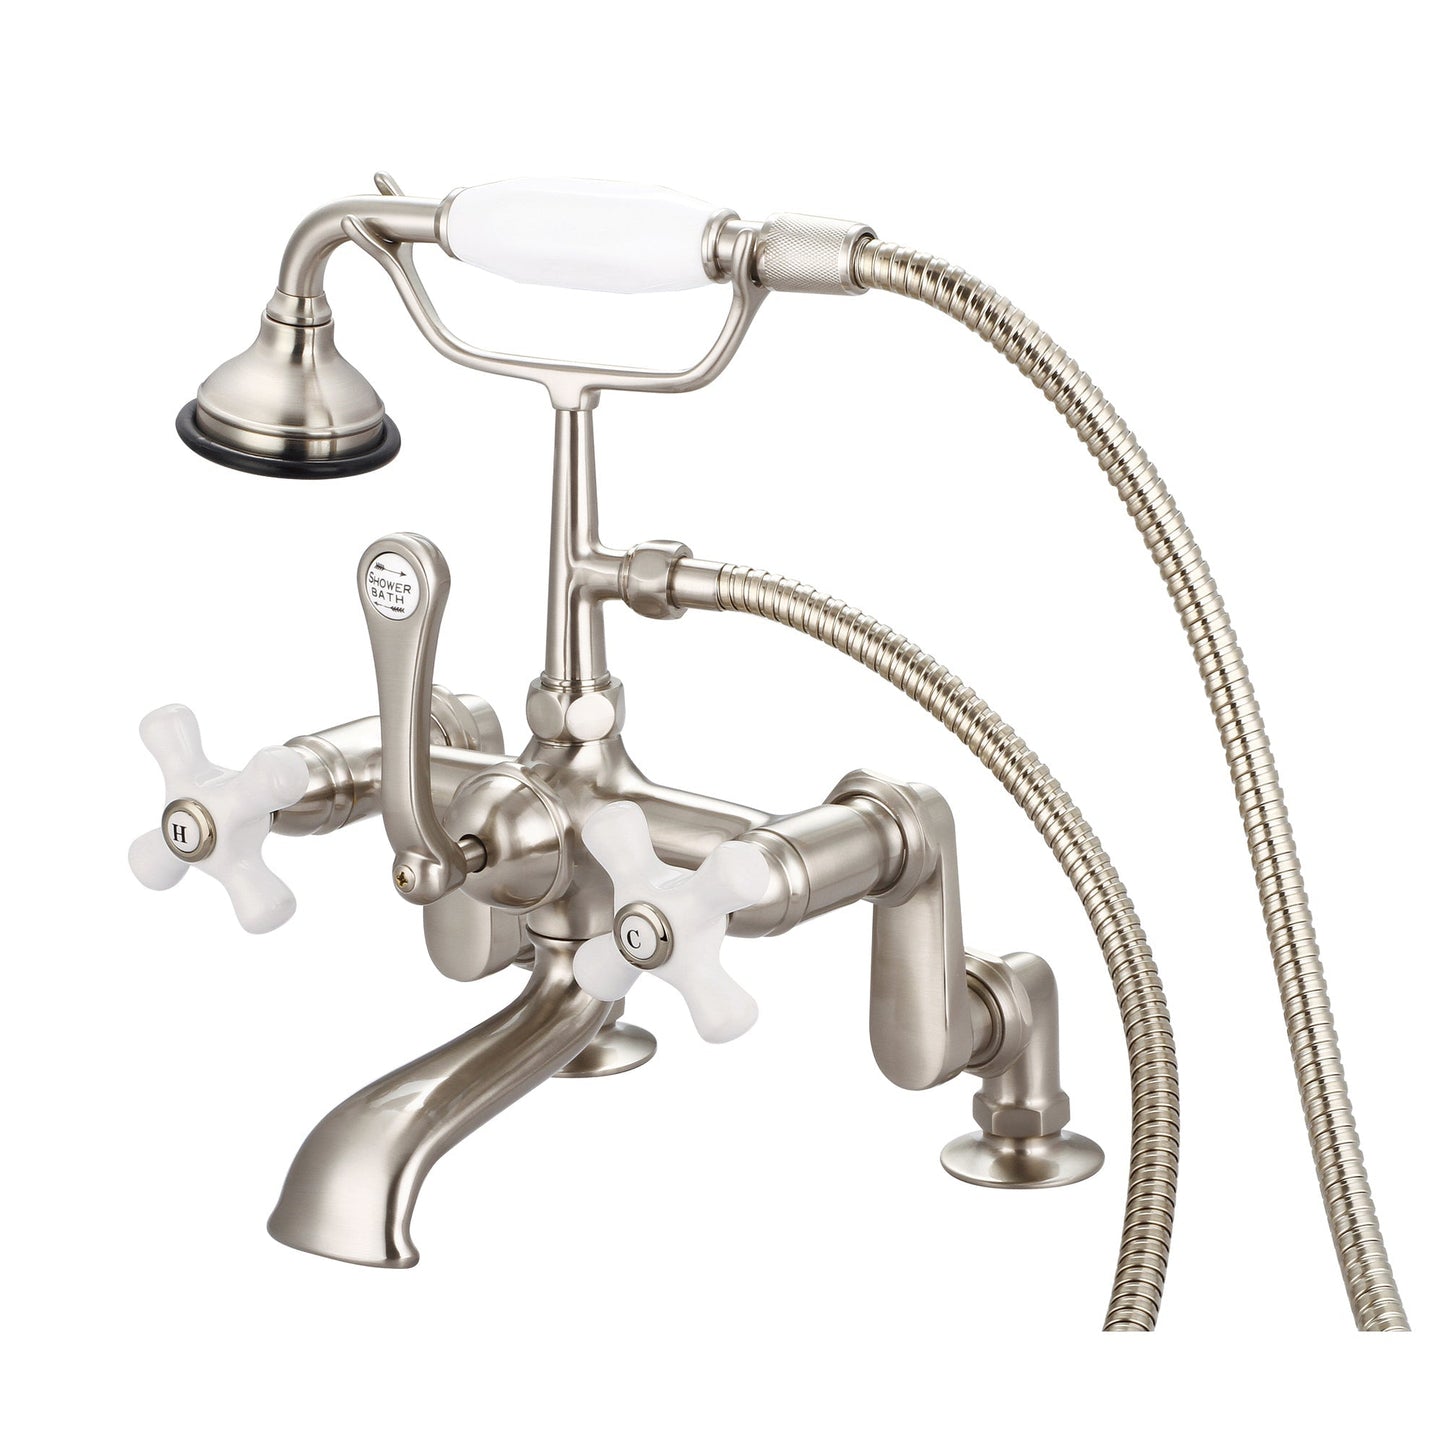 Water Creation Vintage Classic Adjustable Center Deck Mount Tub F6-0008 7" Grey Solid Brass Faucet With Handheld Shower And Porcelain Cross Handles, Hot And Cold Labels Included